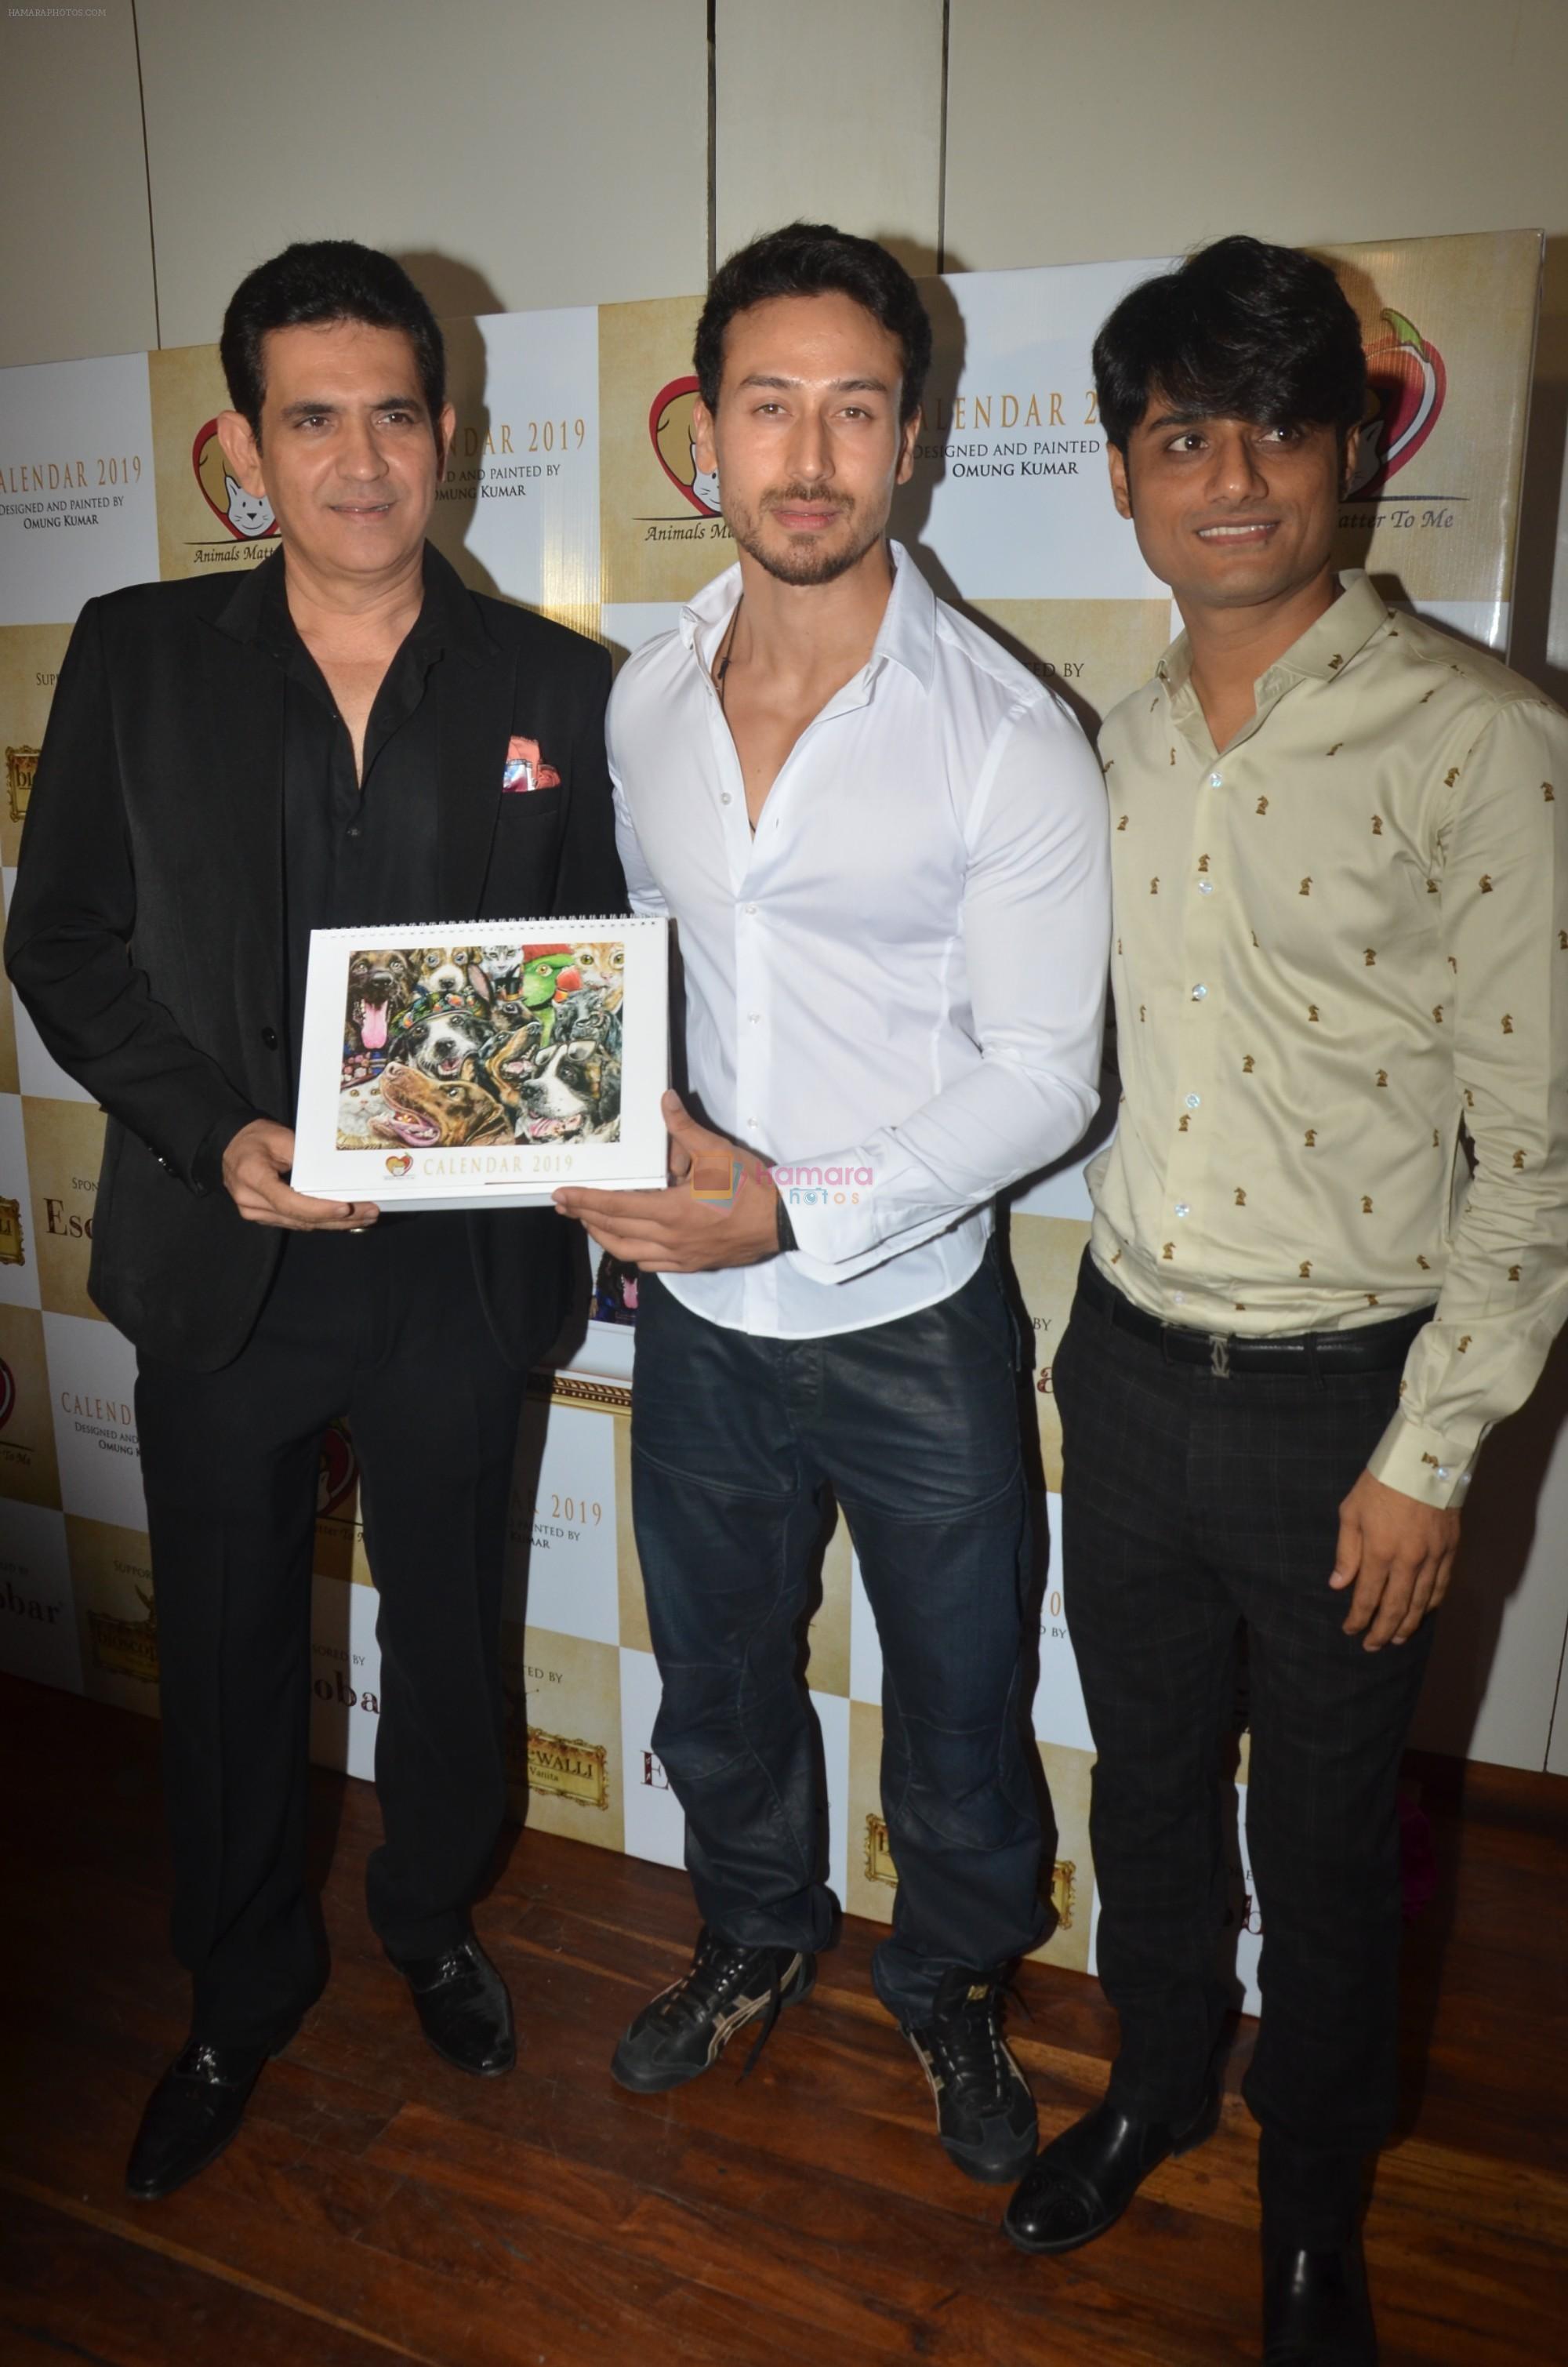 Tiger Shroff at the launch of Hand Painted Animal Calendar By Filmmaker Omung Kumar on 21st Nov 2018